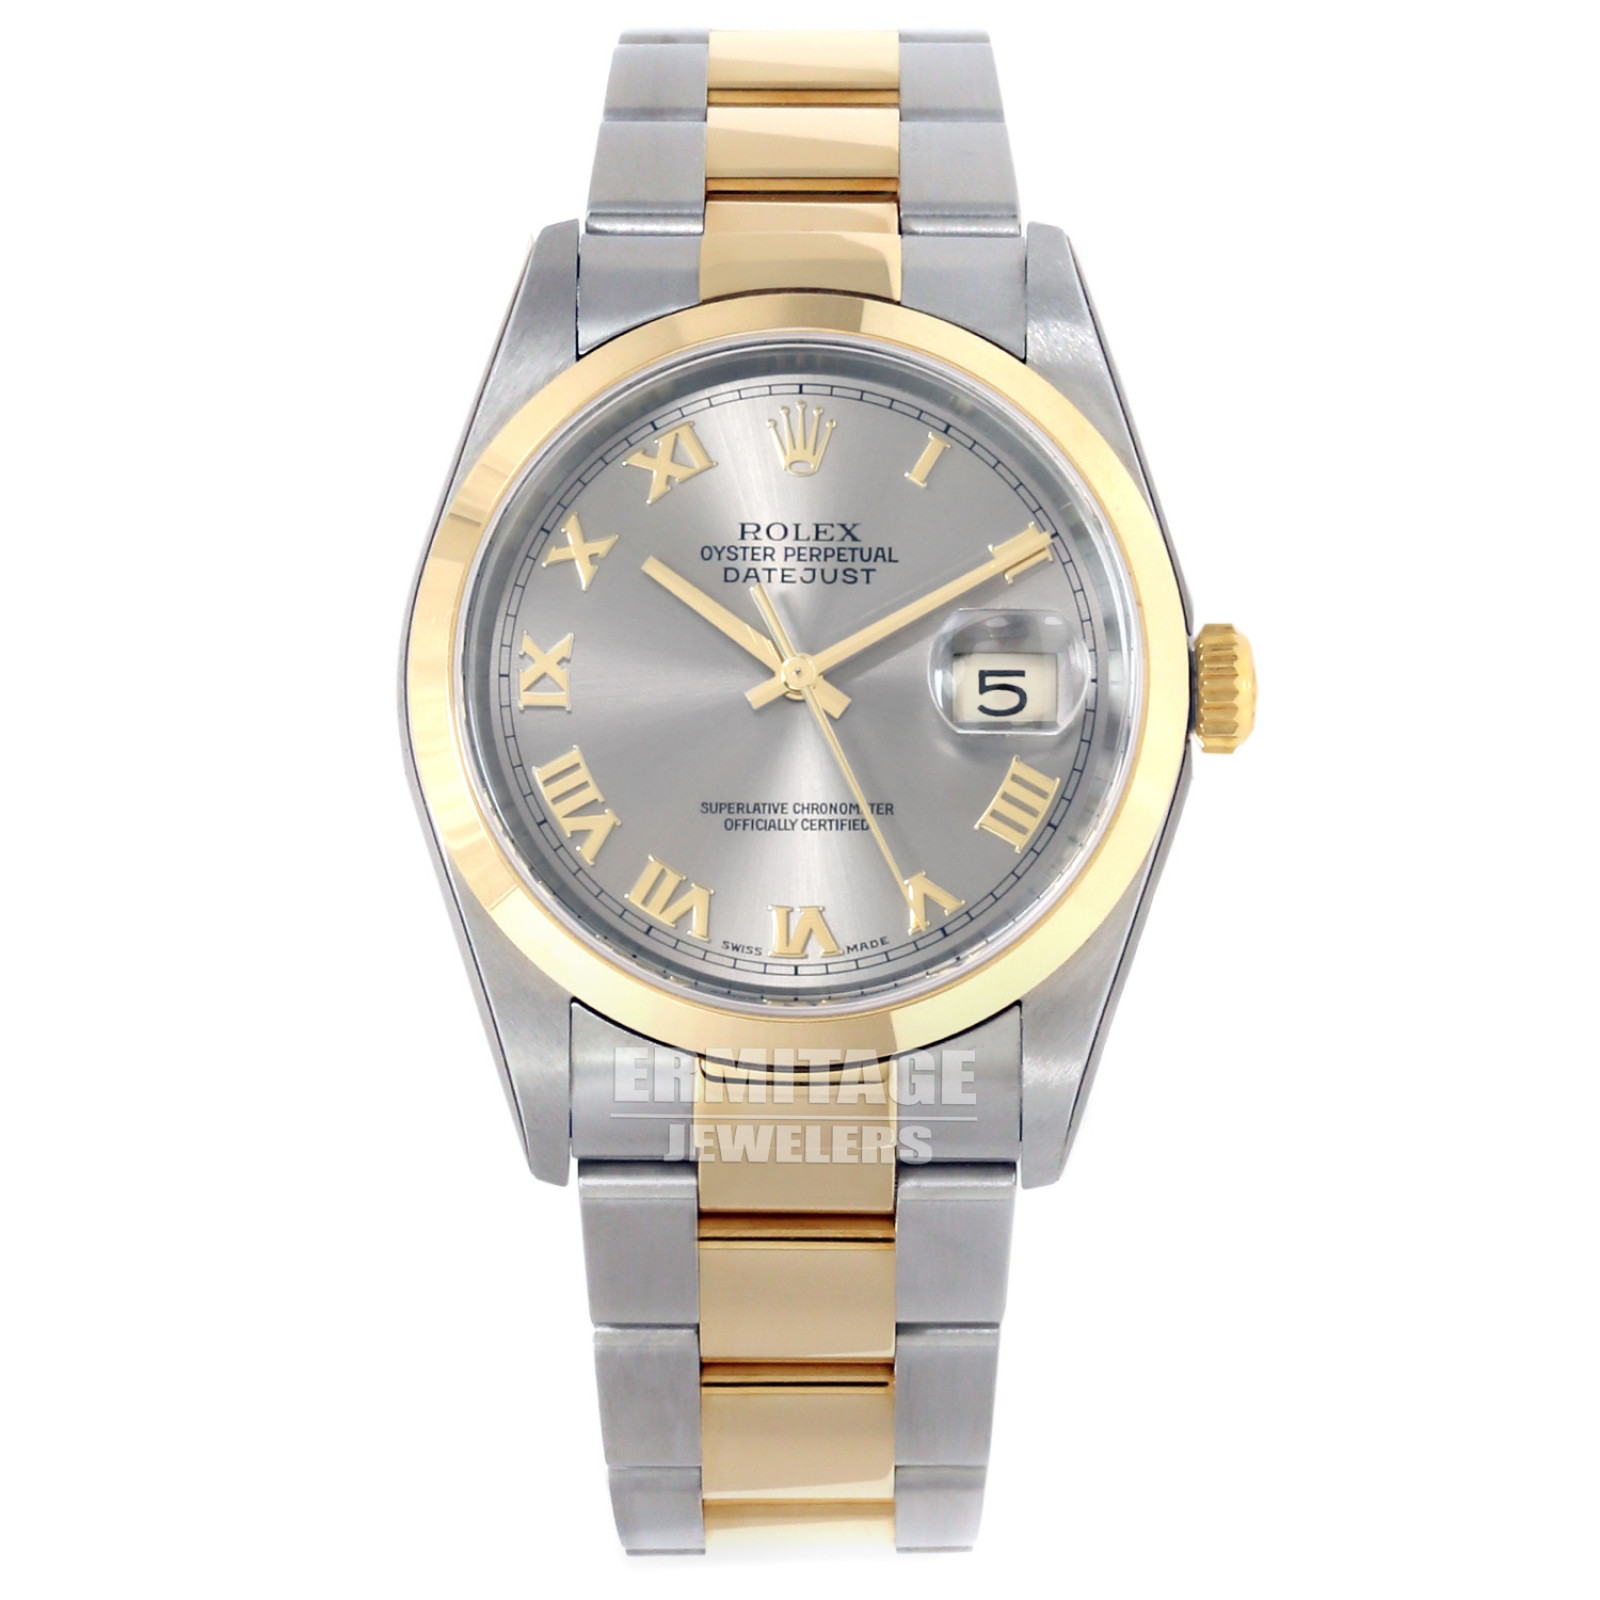 Rolex Datejust 16203 with Steel Dial